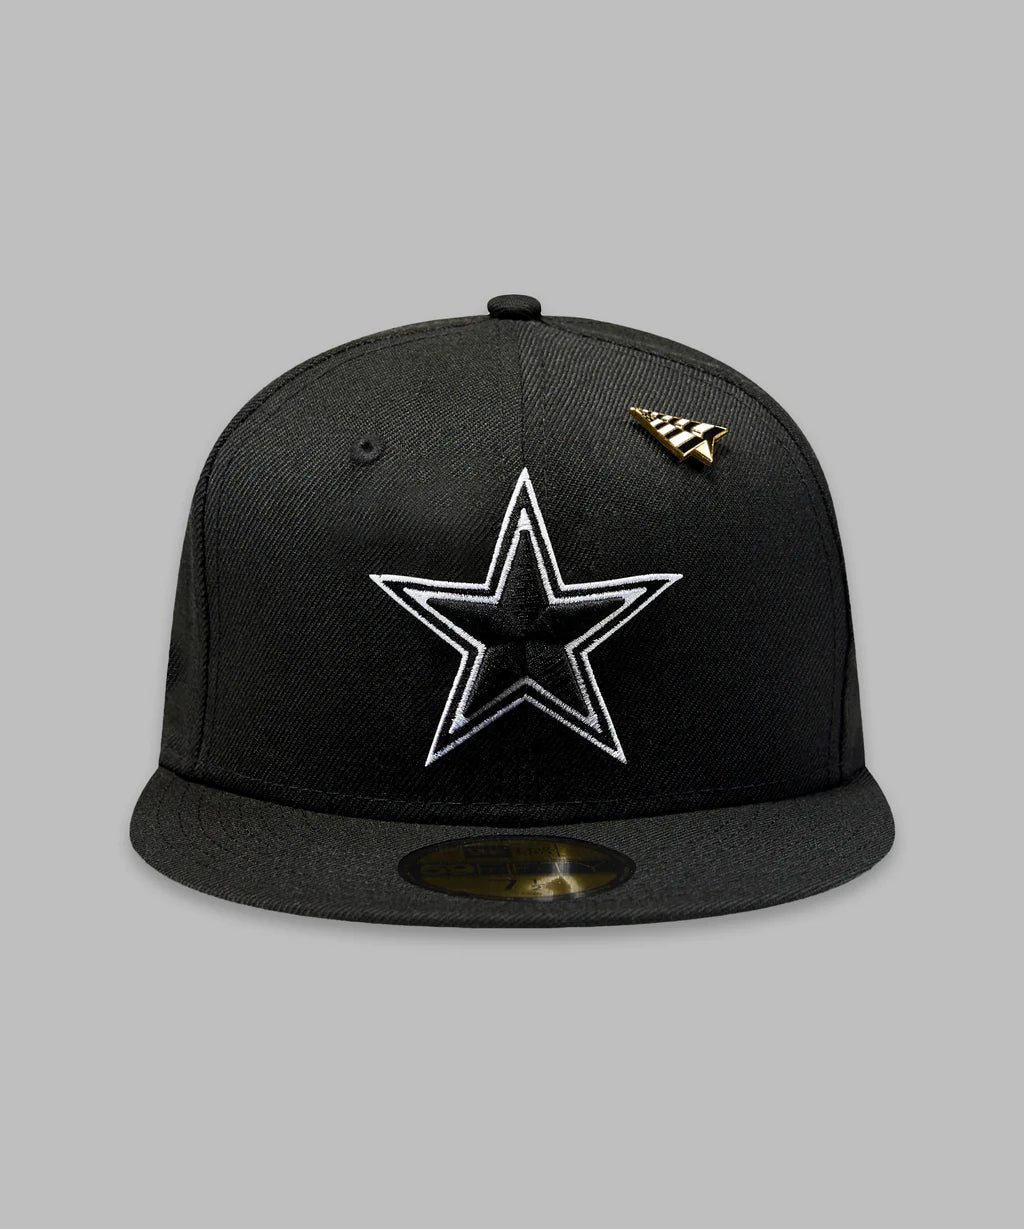 Paper Planes x Dallas Cowboys 59Fifty Fitted Hat